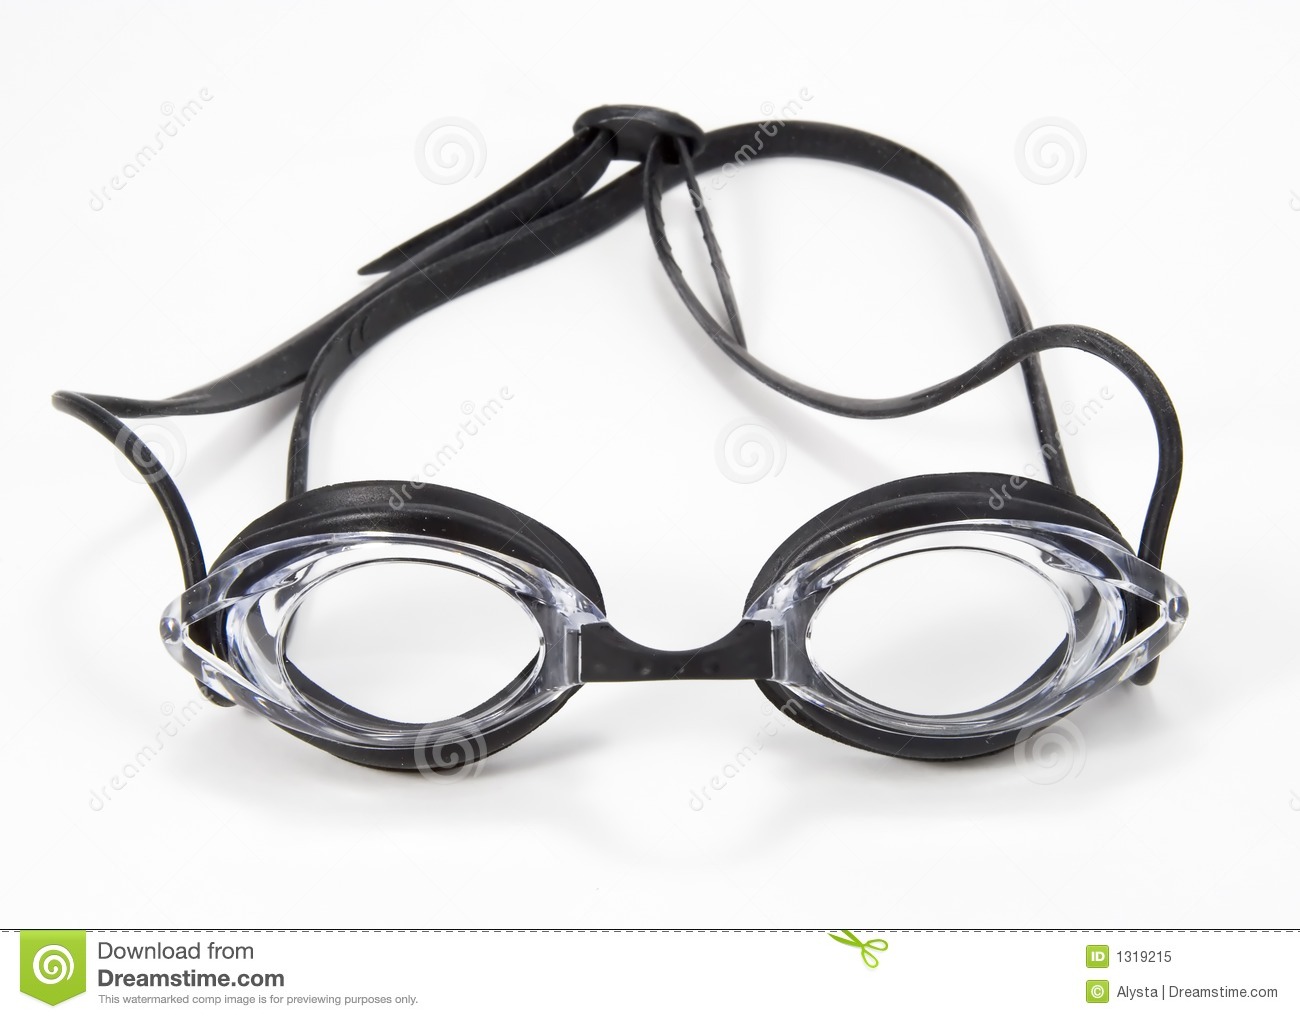 Dreamstime Comblack Swimming Goggles Front Royalty Free Stock Photo